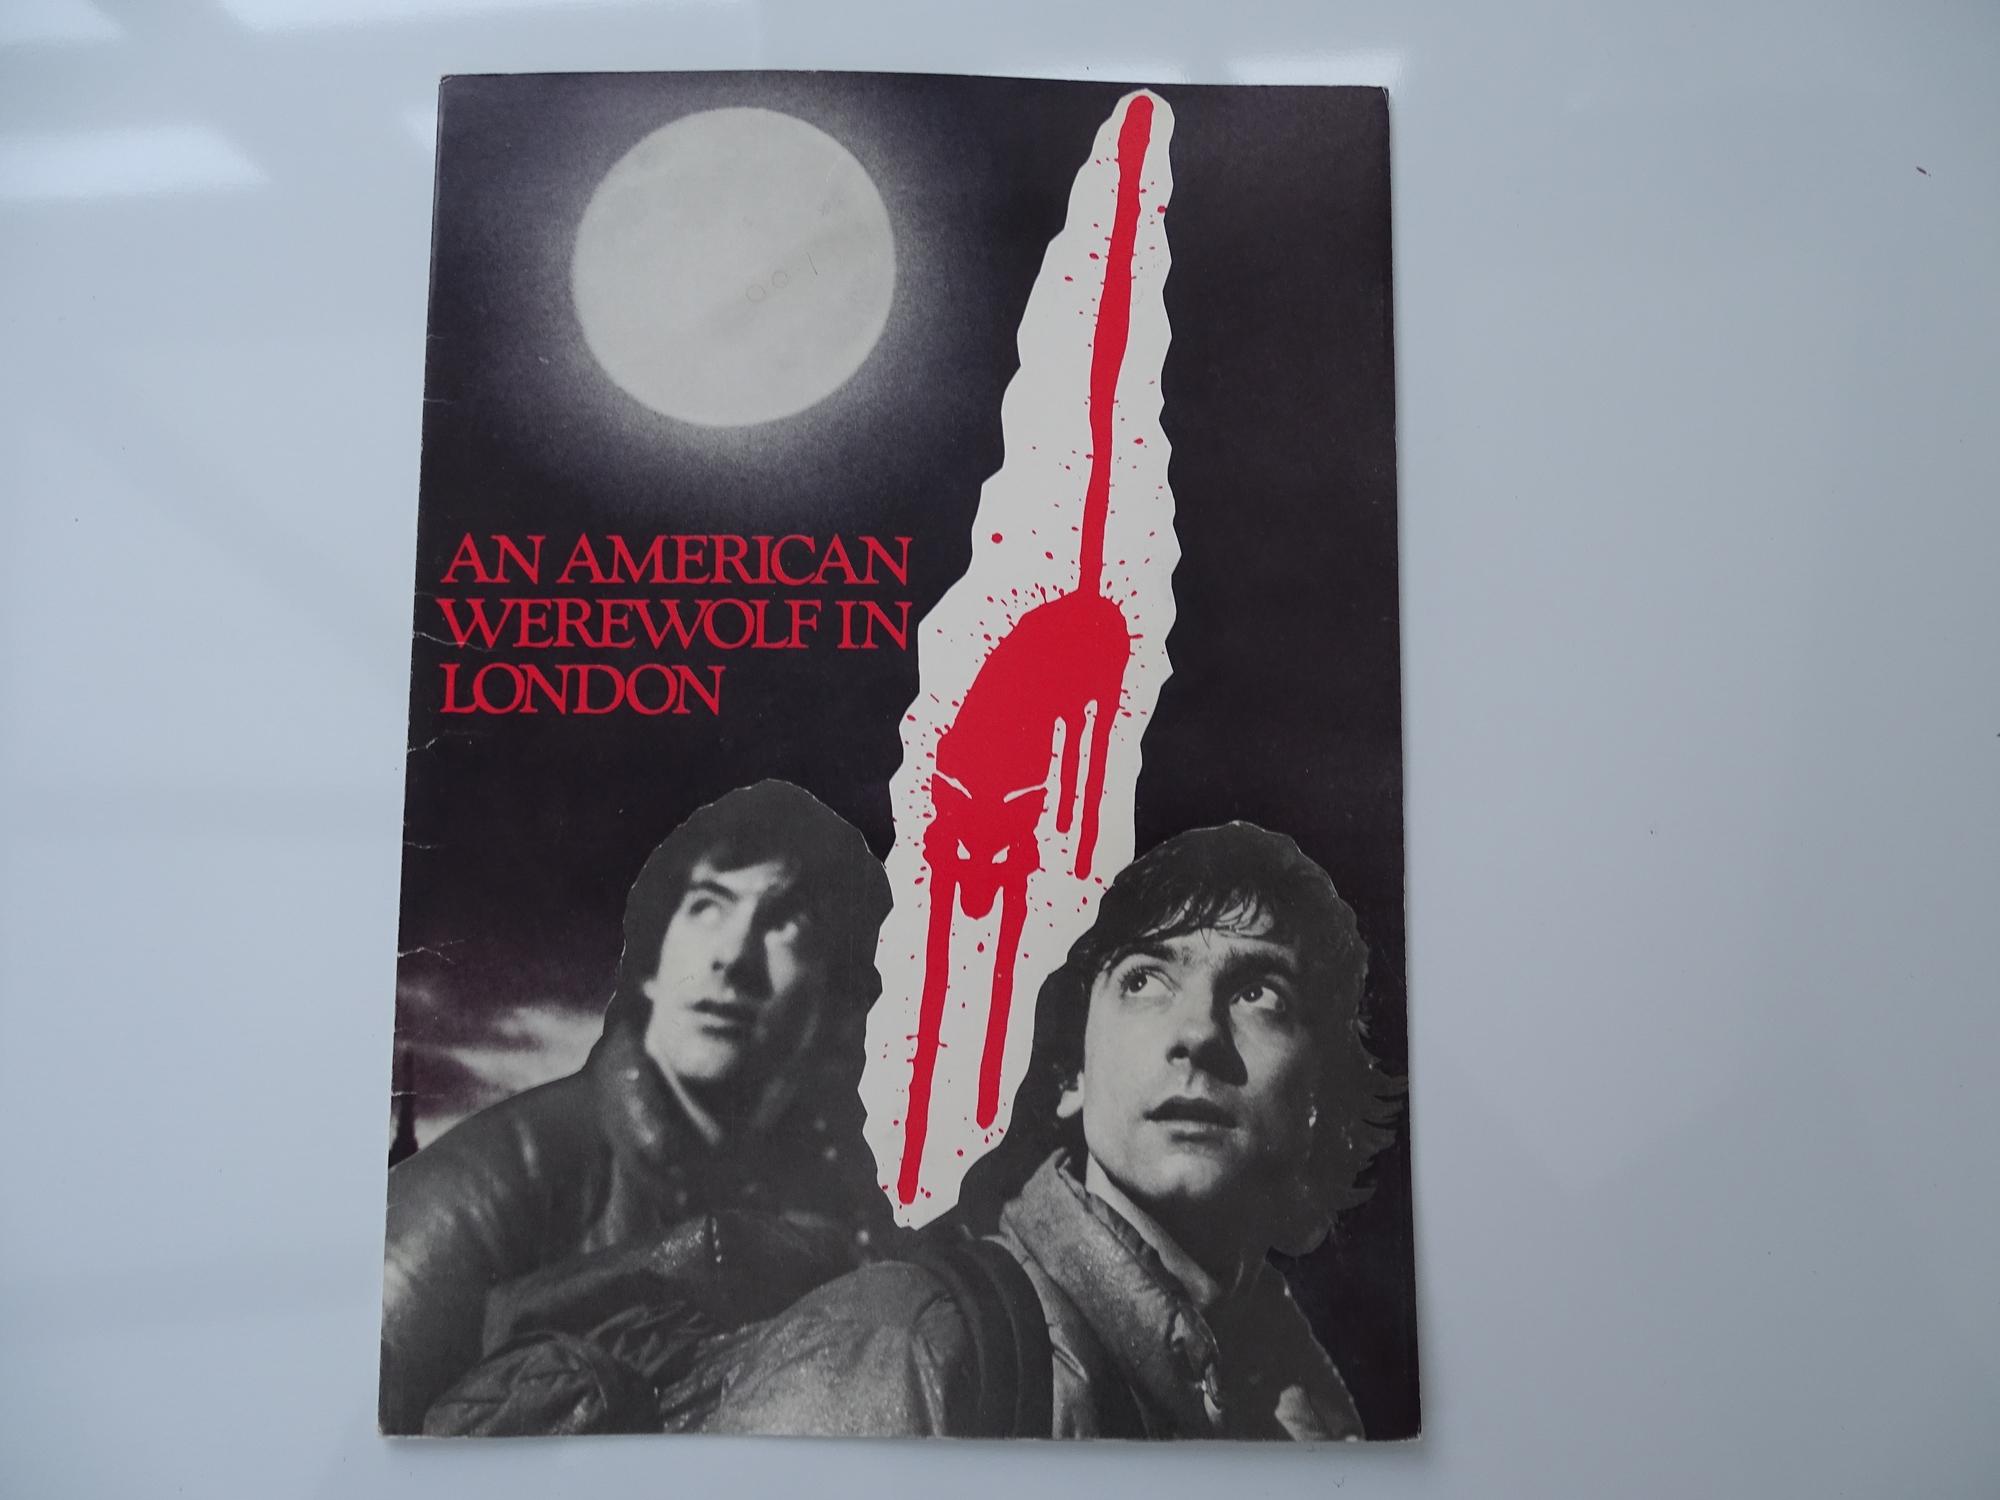 AN AMERICAN WEREWOLF IN LONDON (1981) - UK Quad Film Poster (arrived rolled, originally folded) - Image 2 of 2